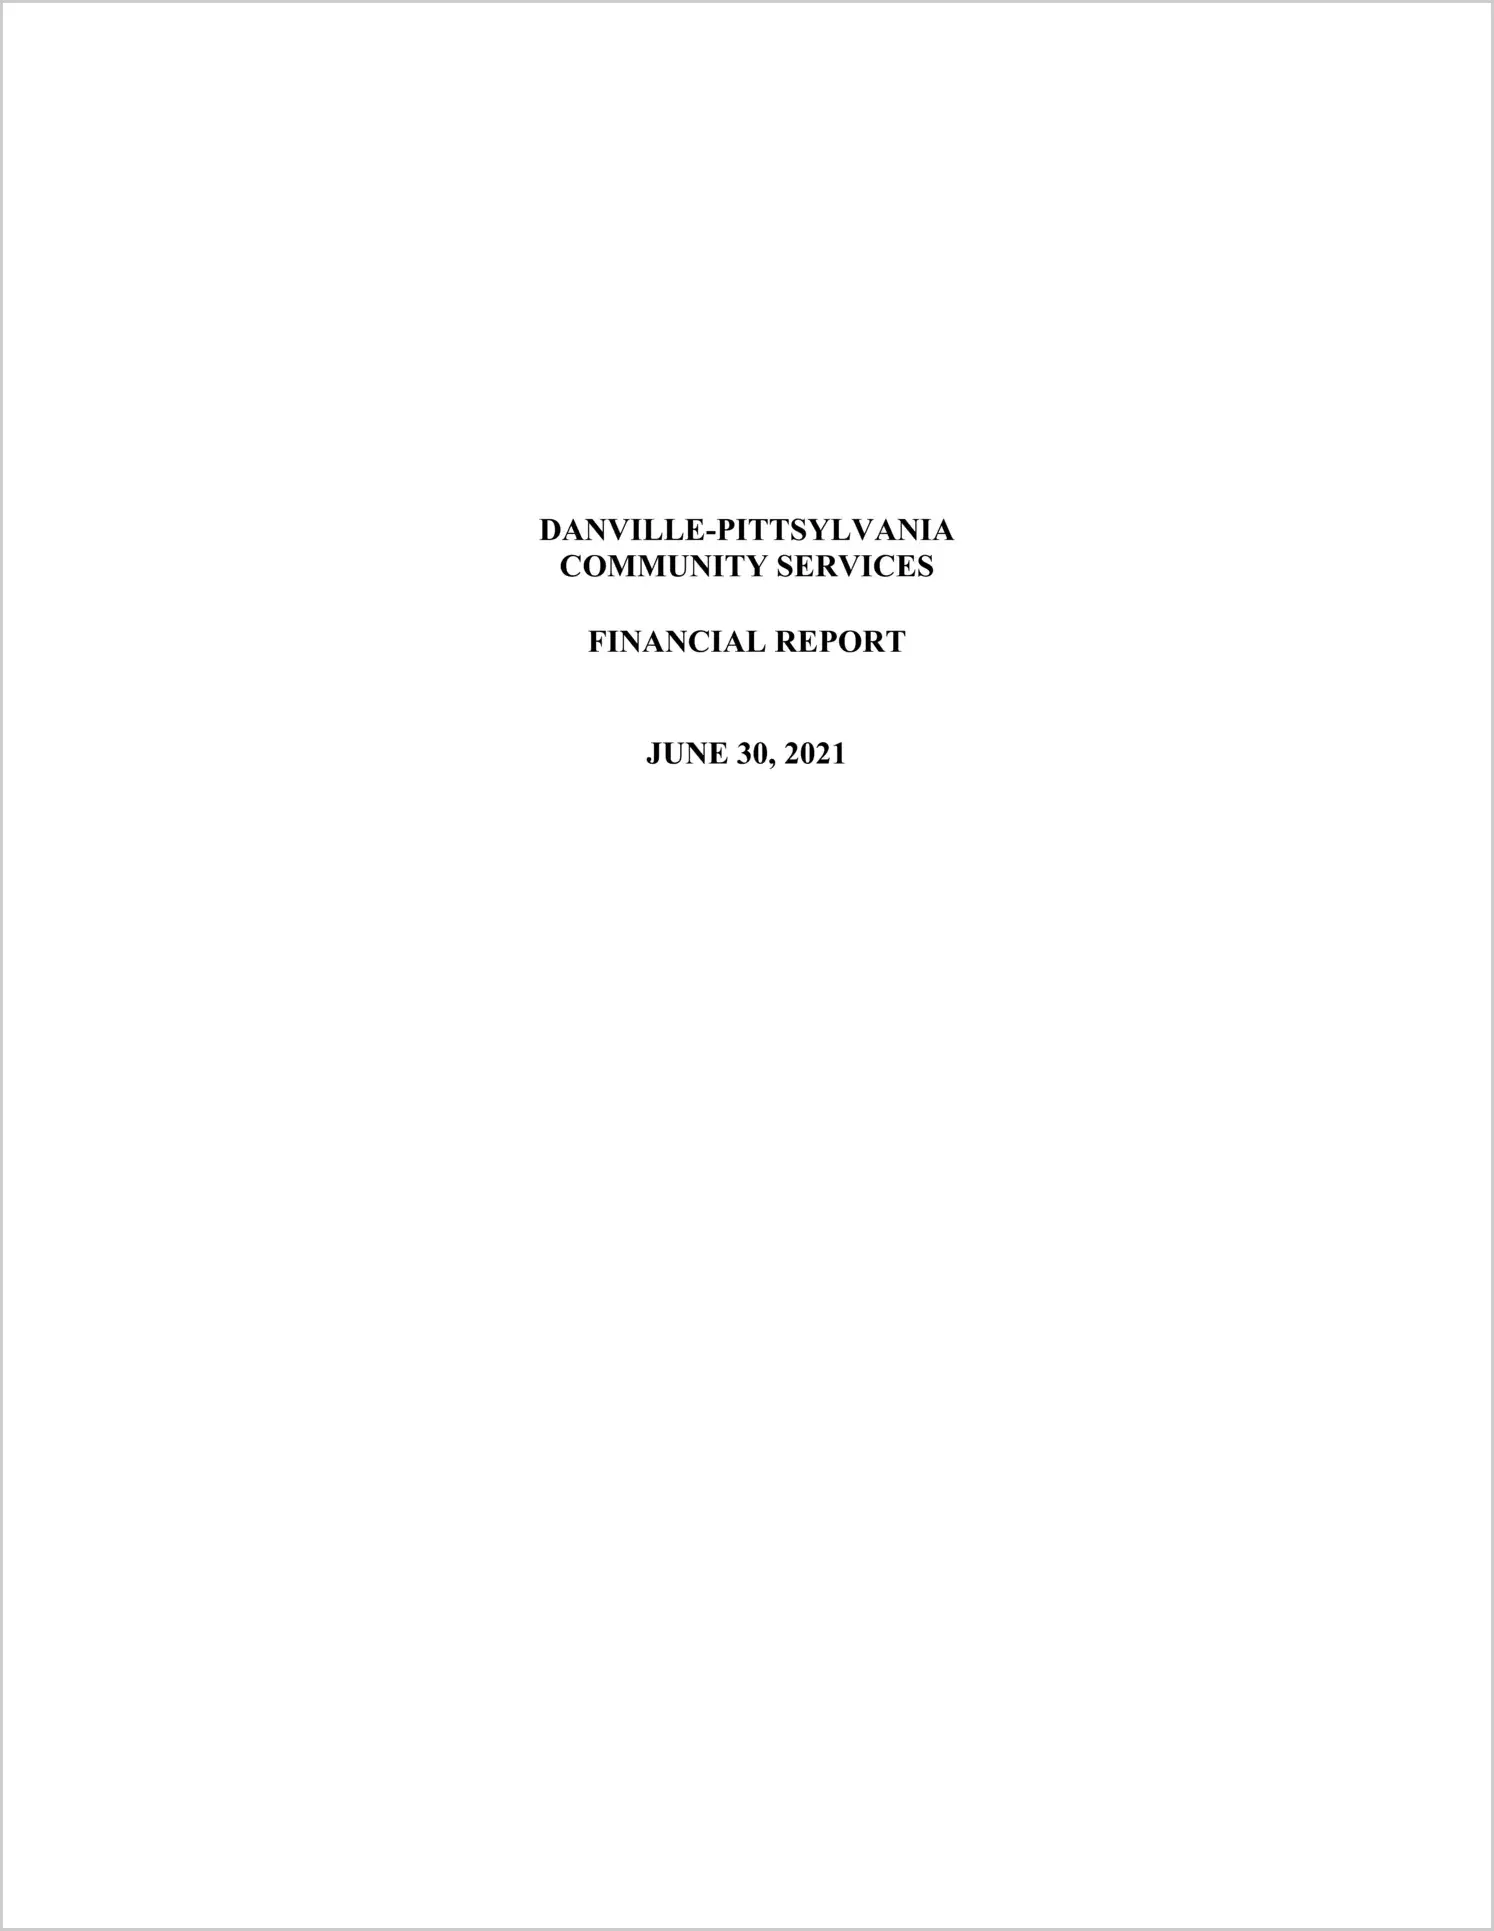 2021 ABC/Other Annual Financial Report  for Danville-Pittsylvania Community Services